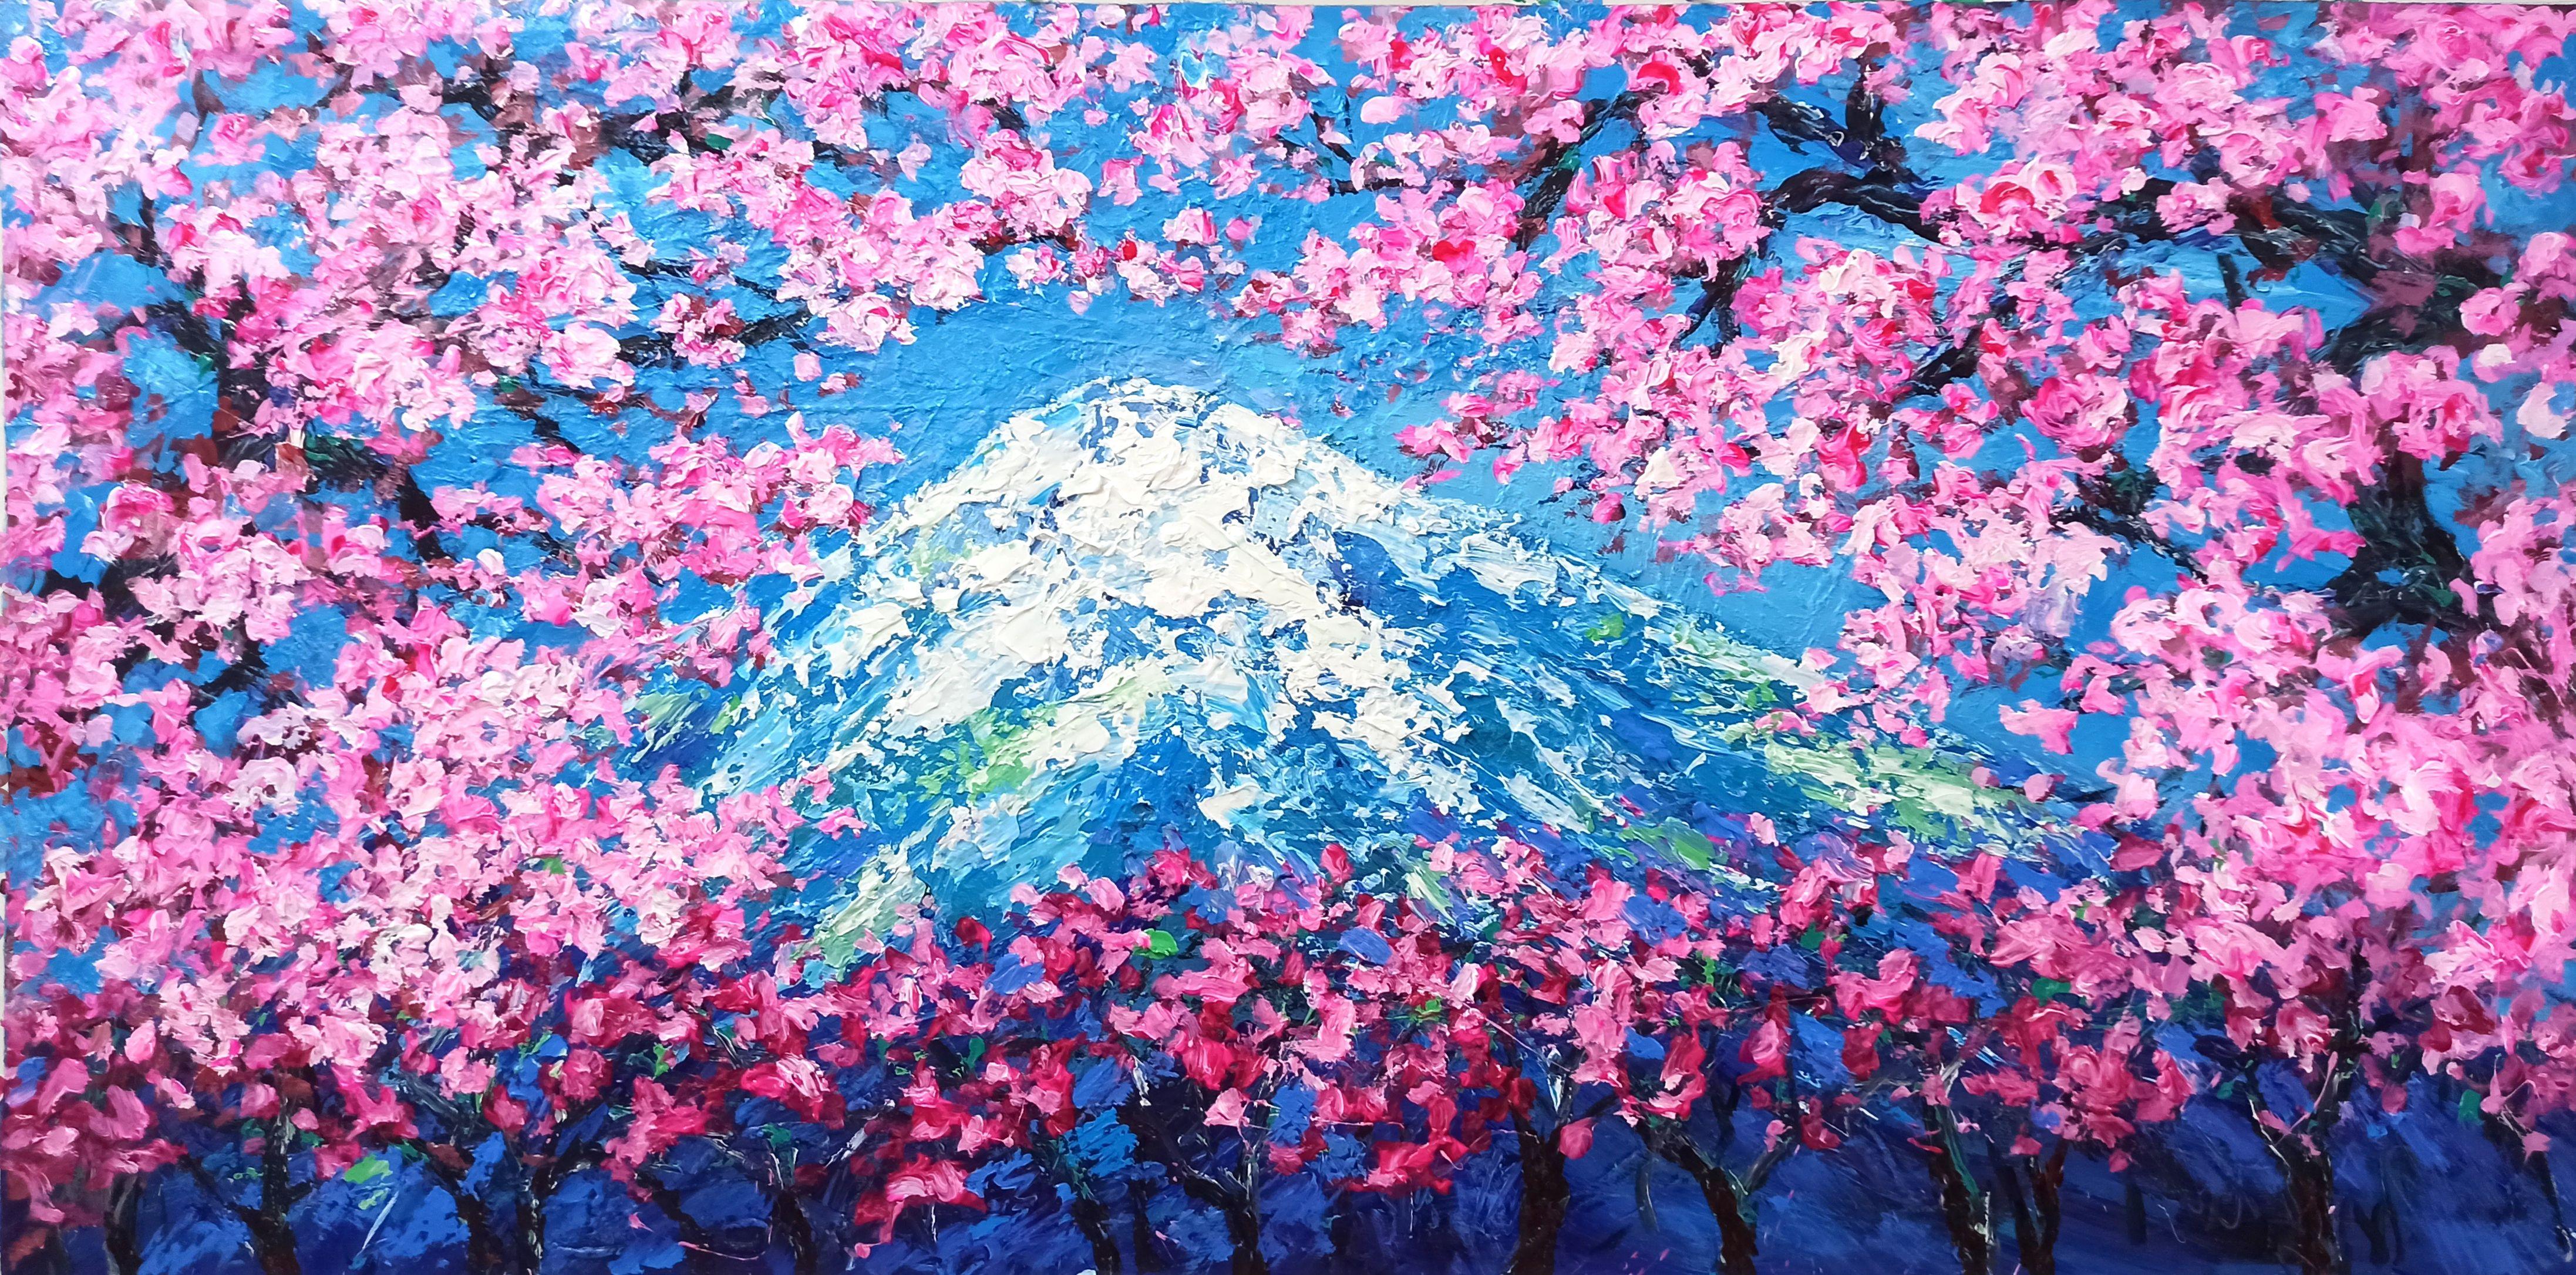 Mount Fuji in spring  Mount Fuji in spring people will immediately think of cherry blossoms. Coming here, visitors have the opportunity to admire the pink flower buds swaying in the wind, in the distance is a soaring mountain covered with white snow